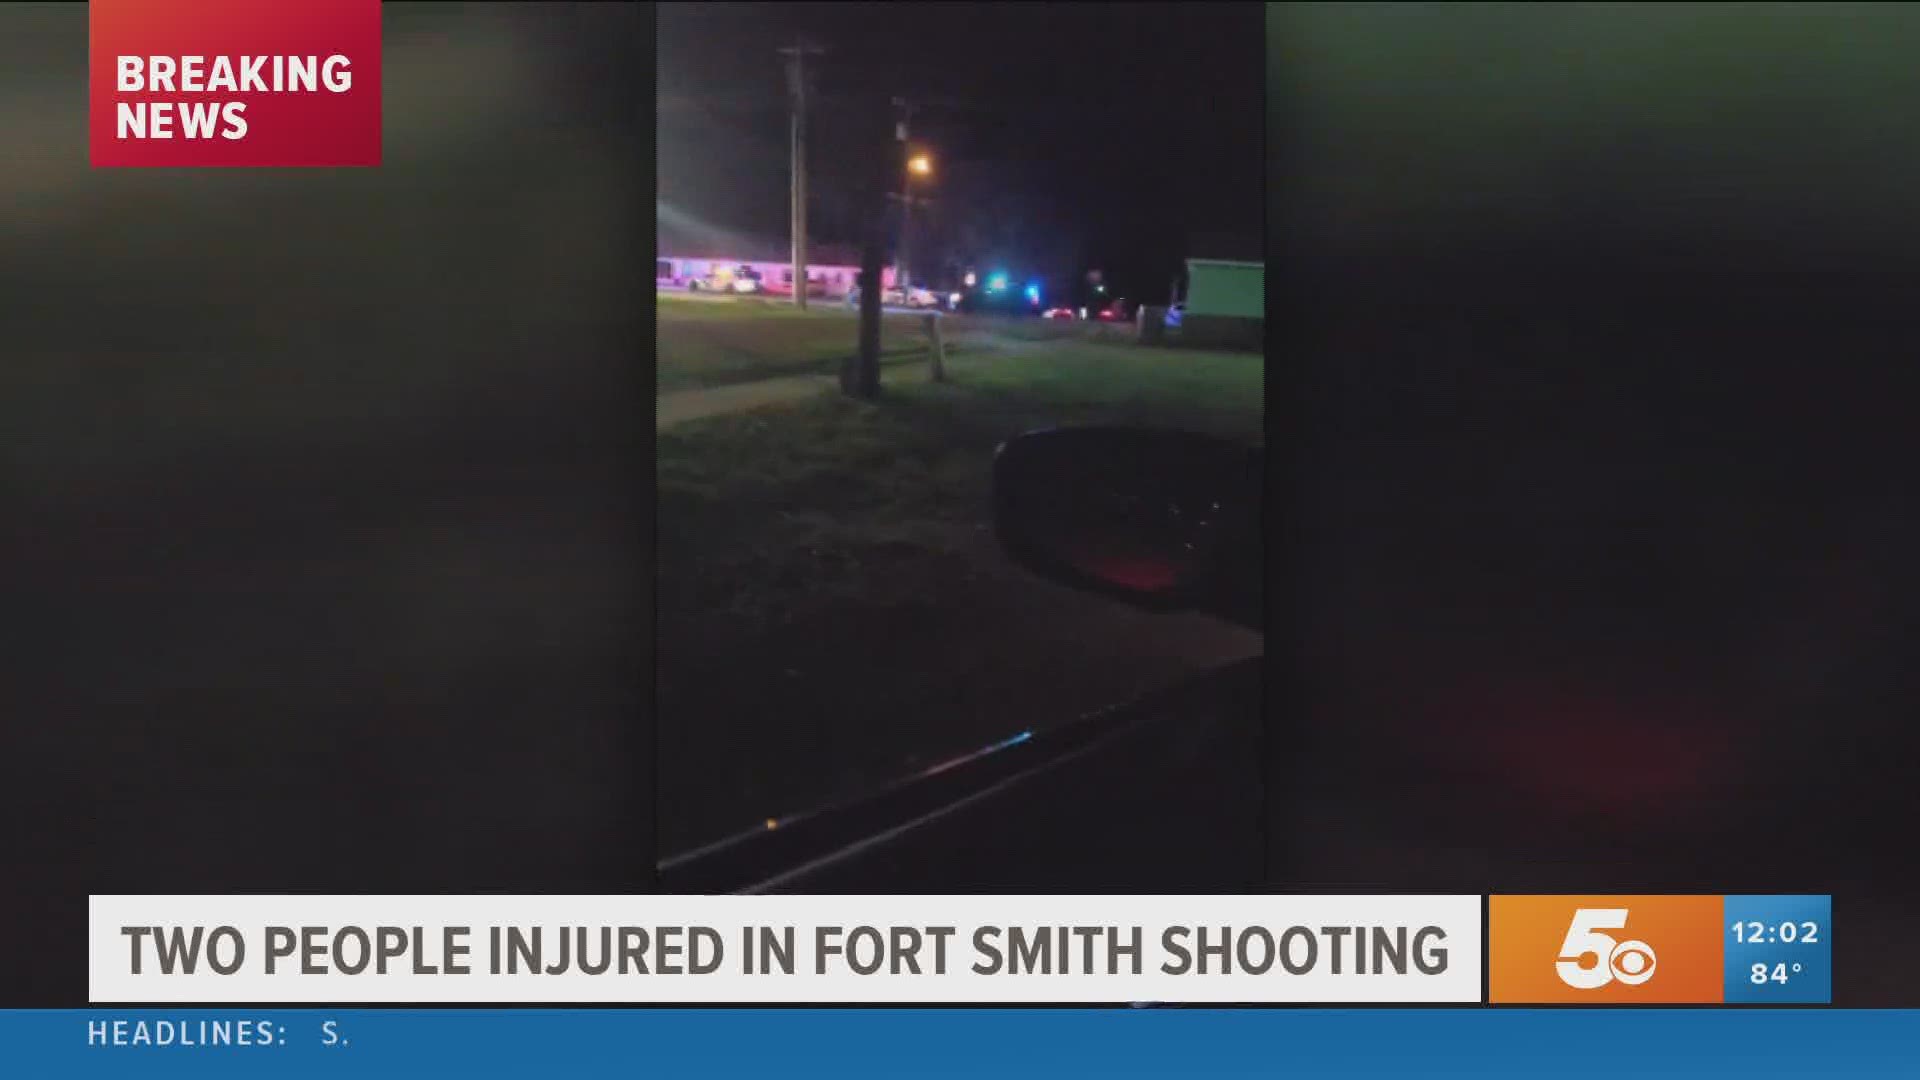 Two people injured in Fort Smith shooting.